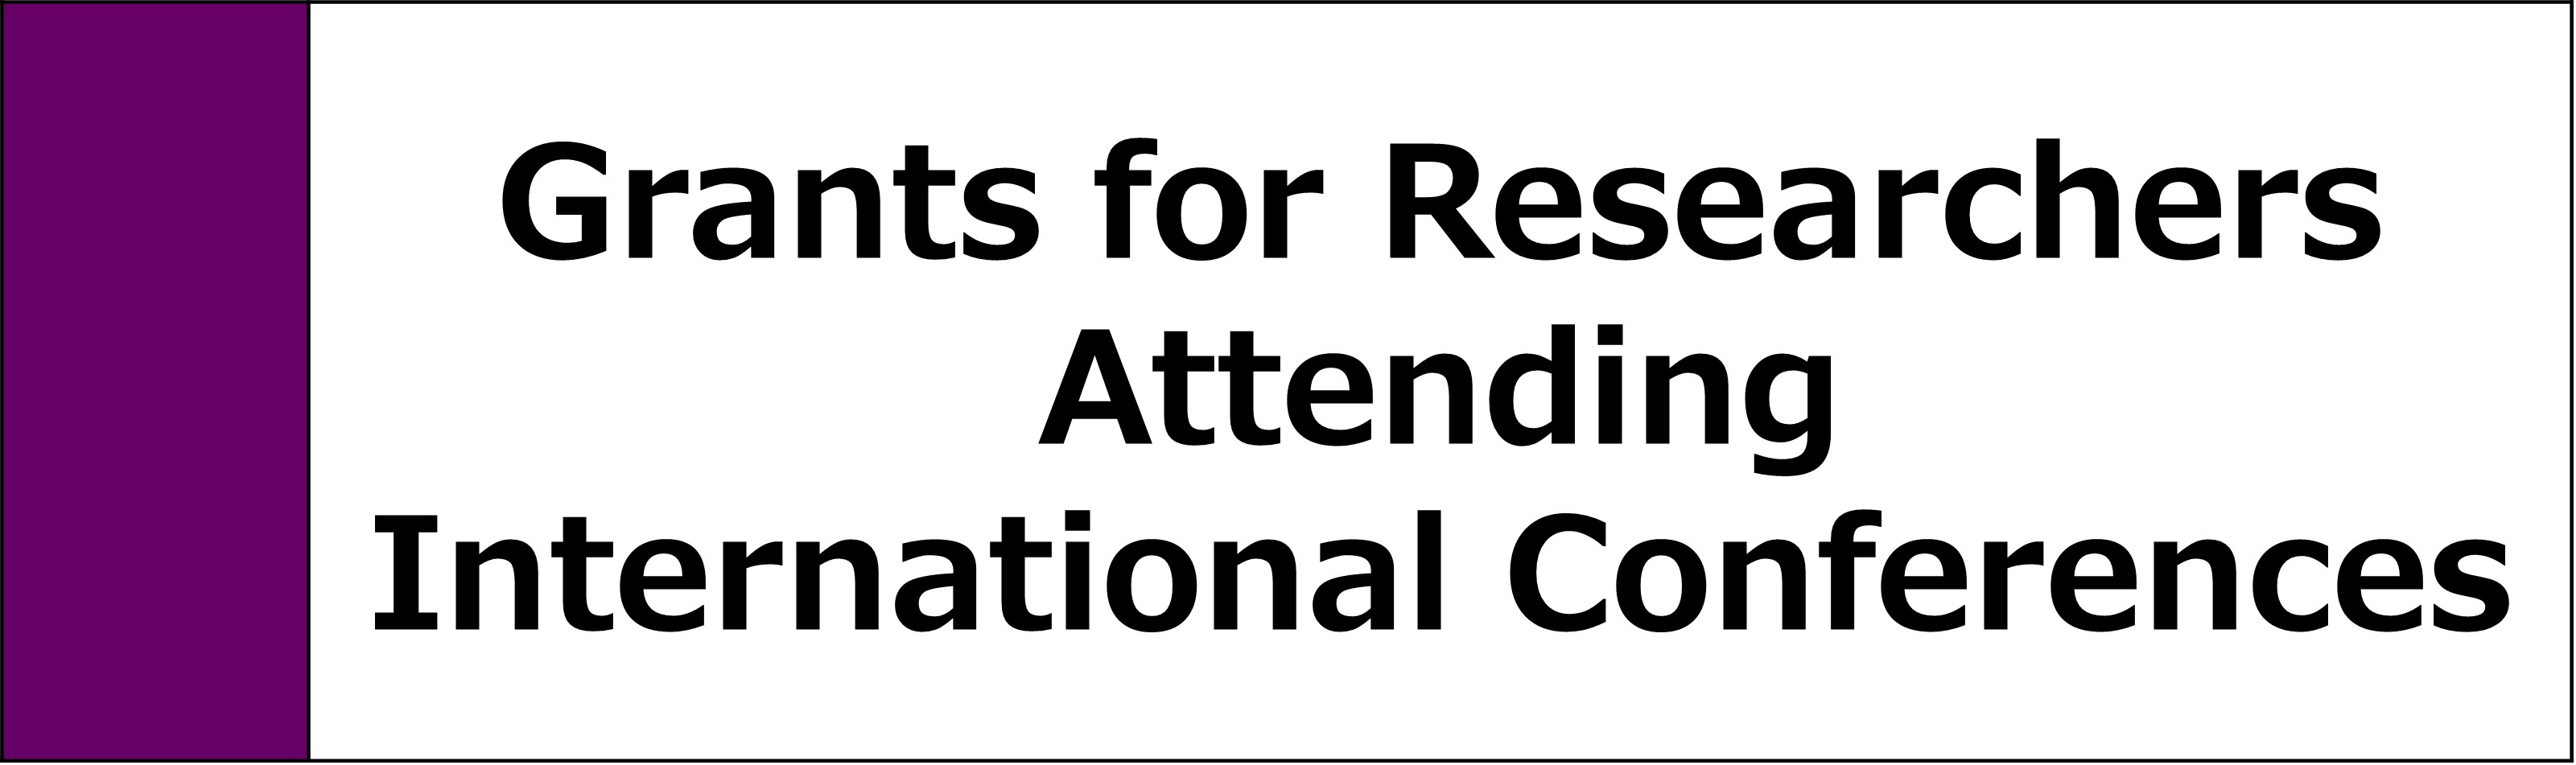 Grants for Researchers Attending International Conferences
